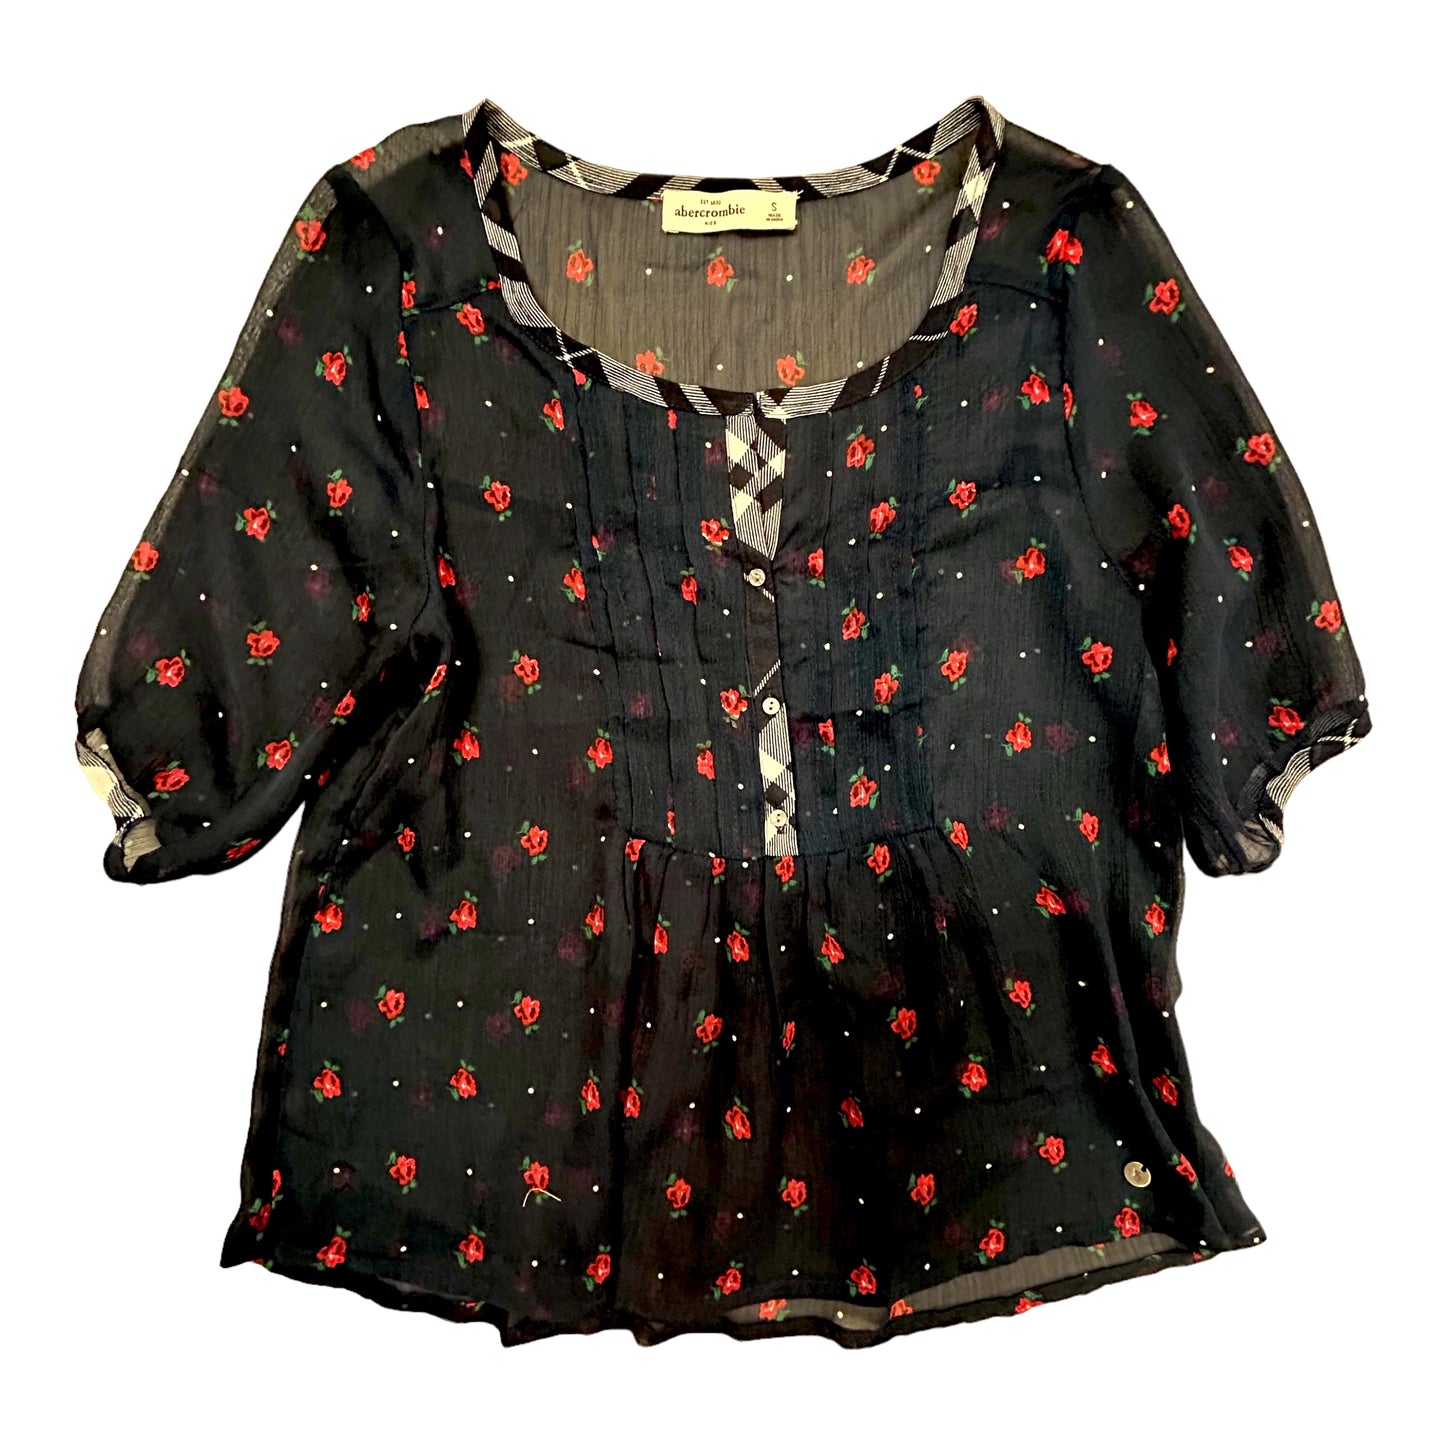 Junior Girls Abercrombie Size Small Navy Floral Print Blouse